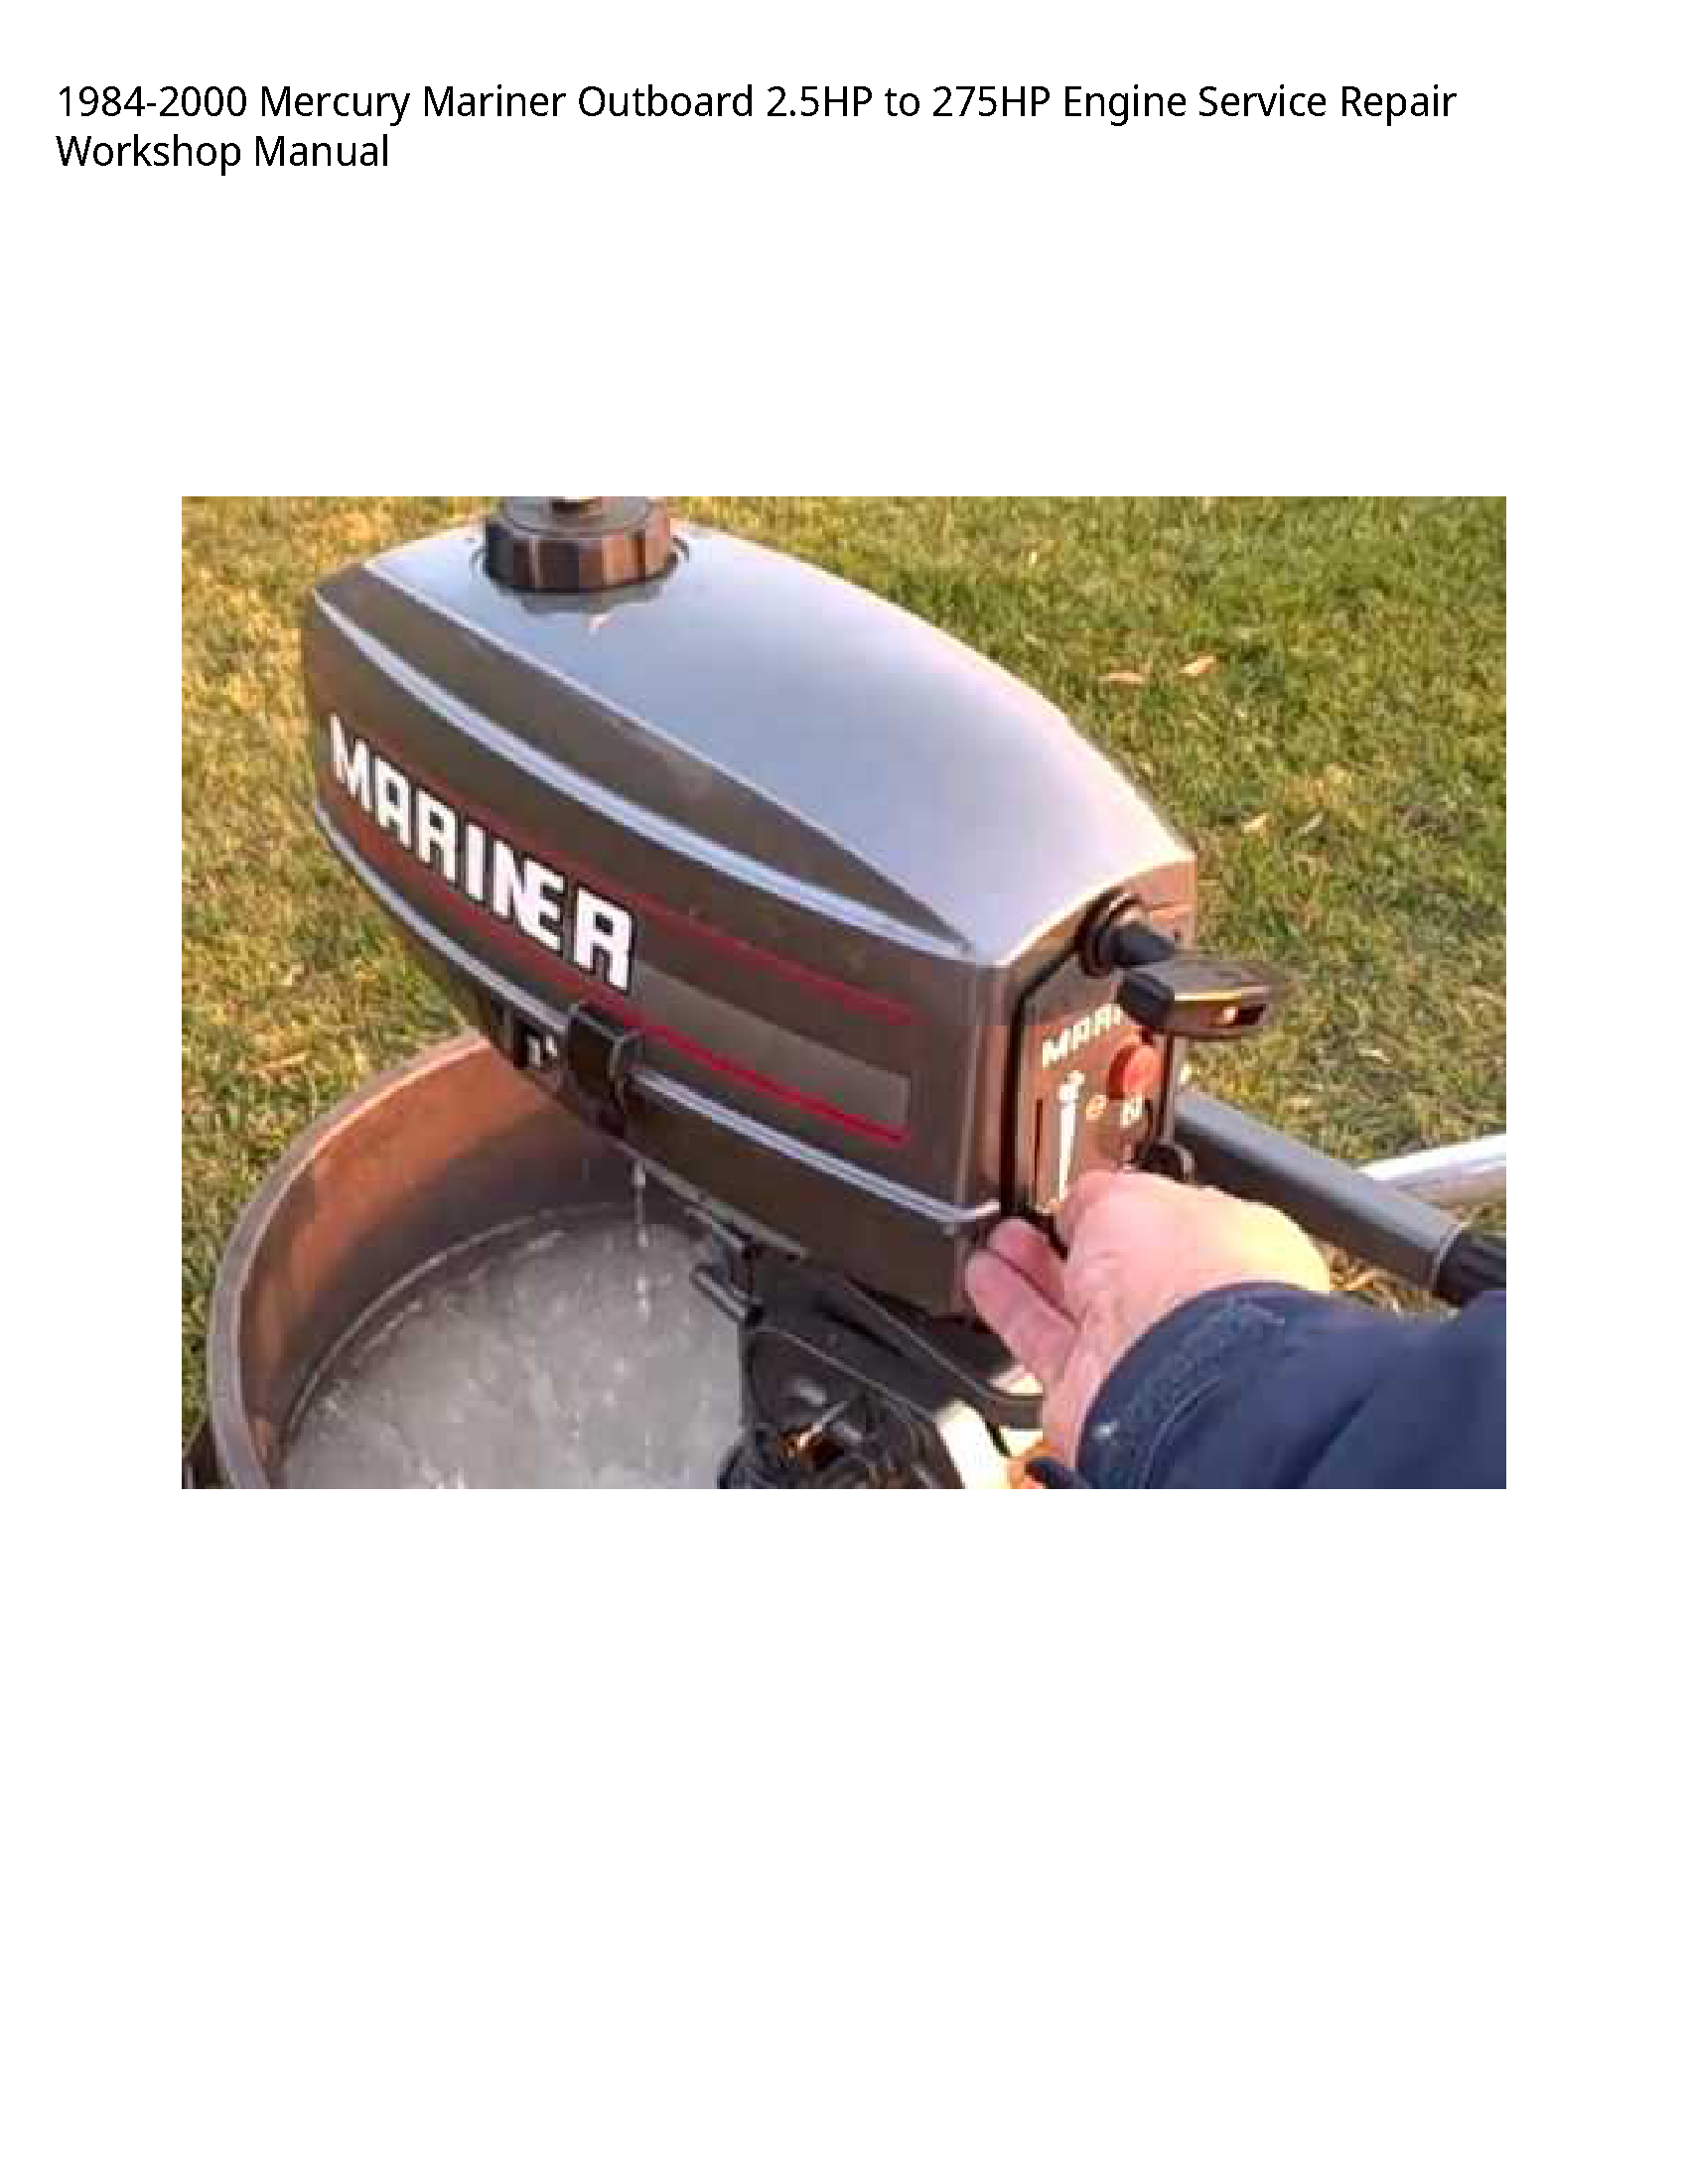 Mercury 2.5HP Mariner Outboard to Engine manual